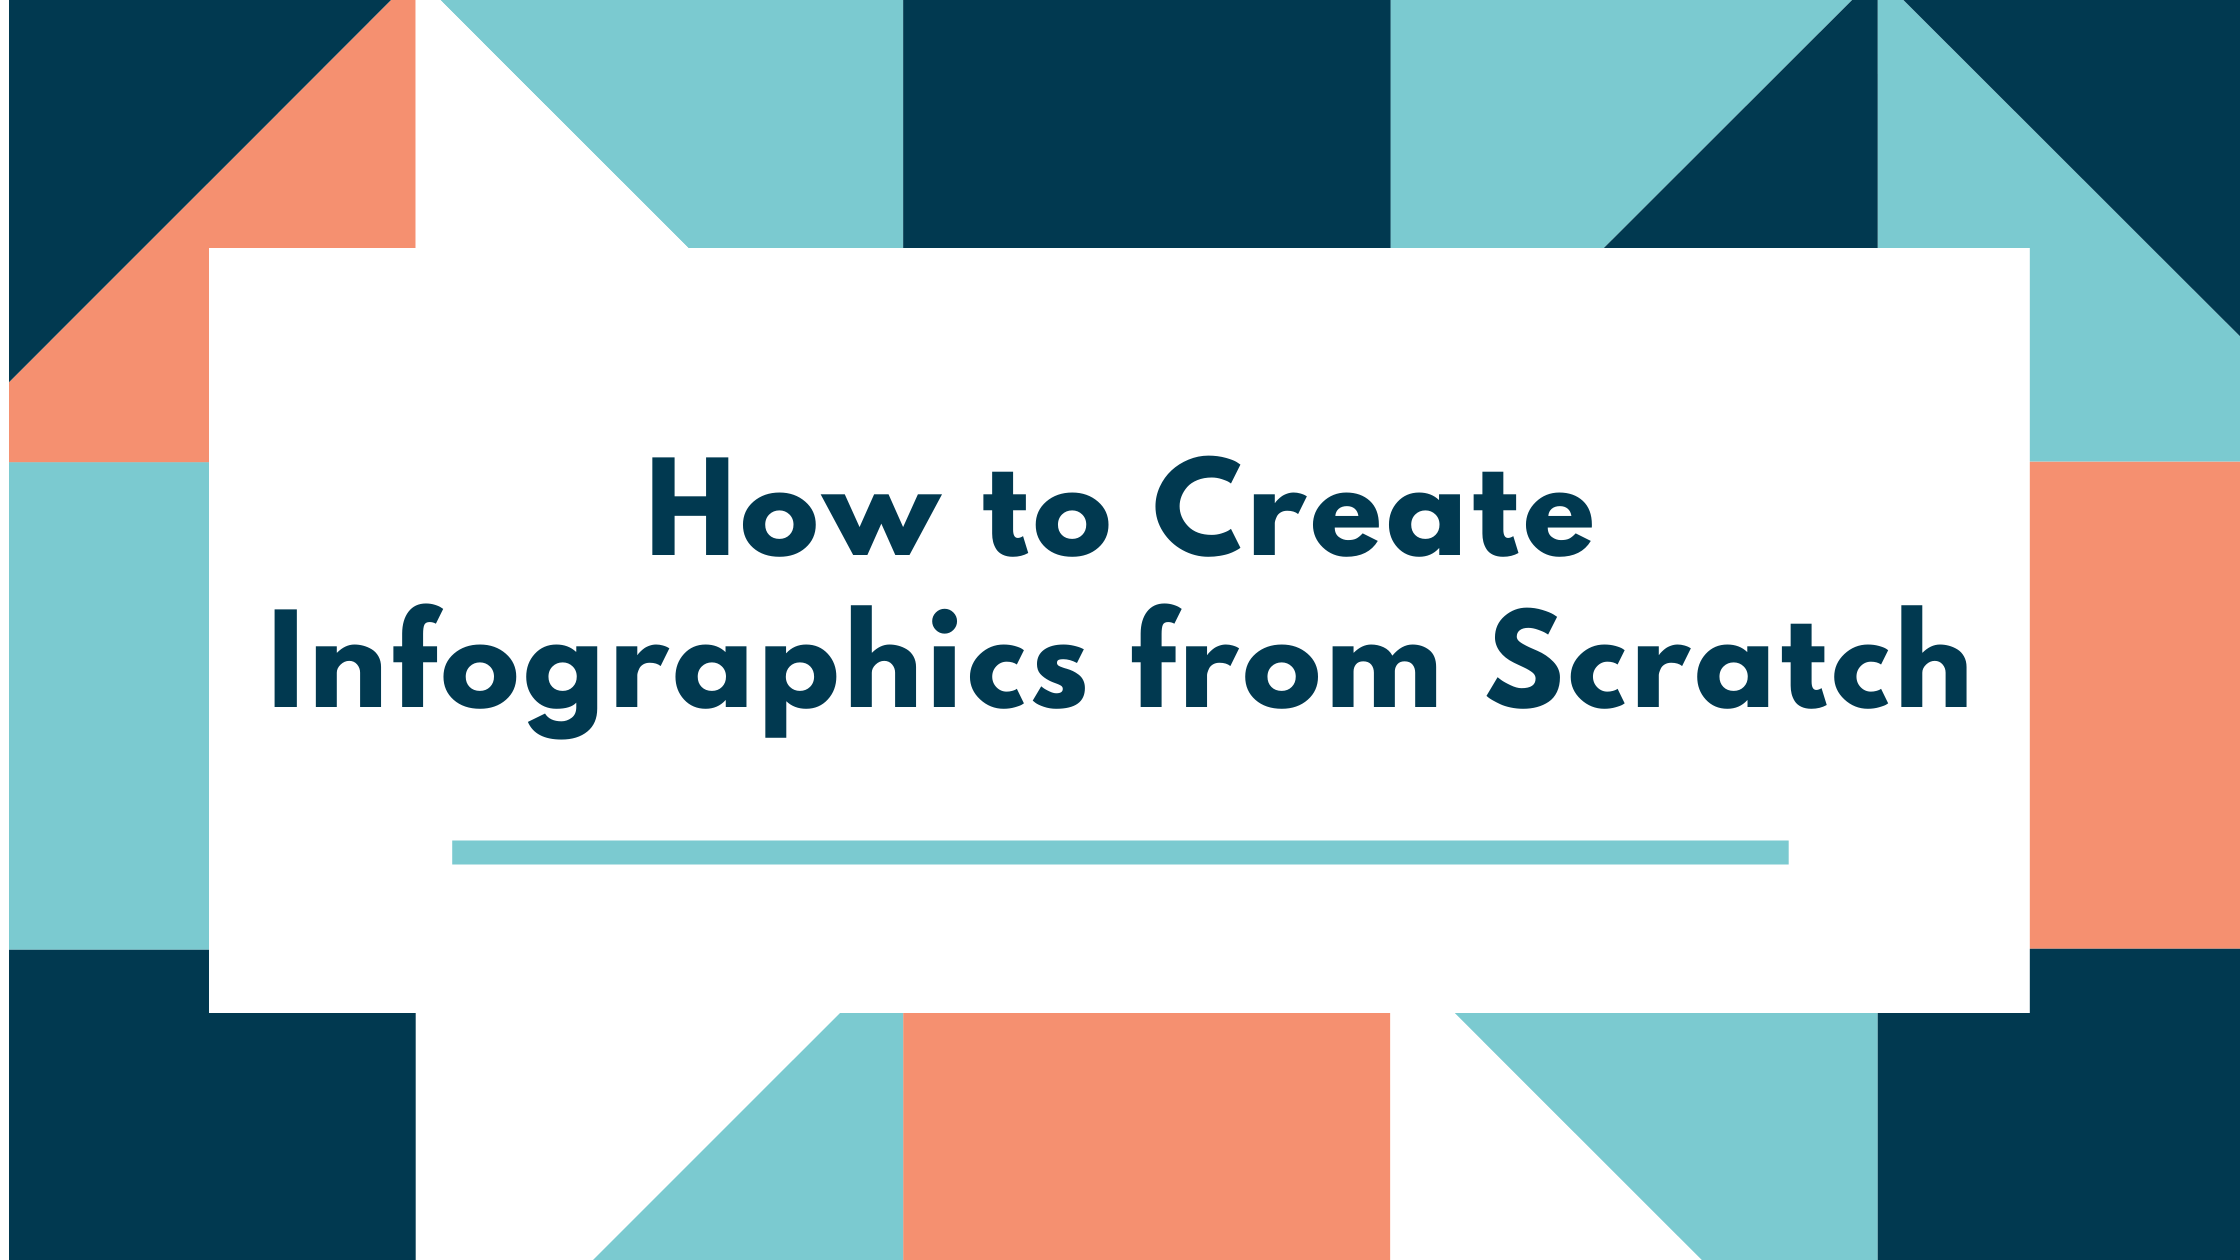 How to Create Infographics from Scratch For Your Business